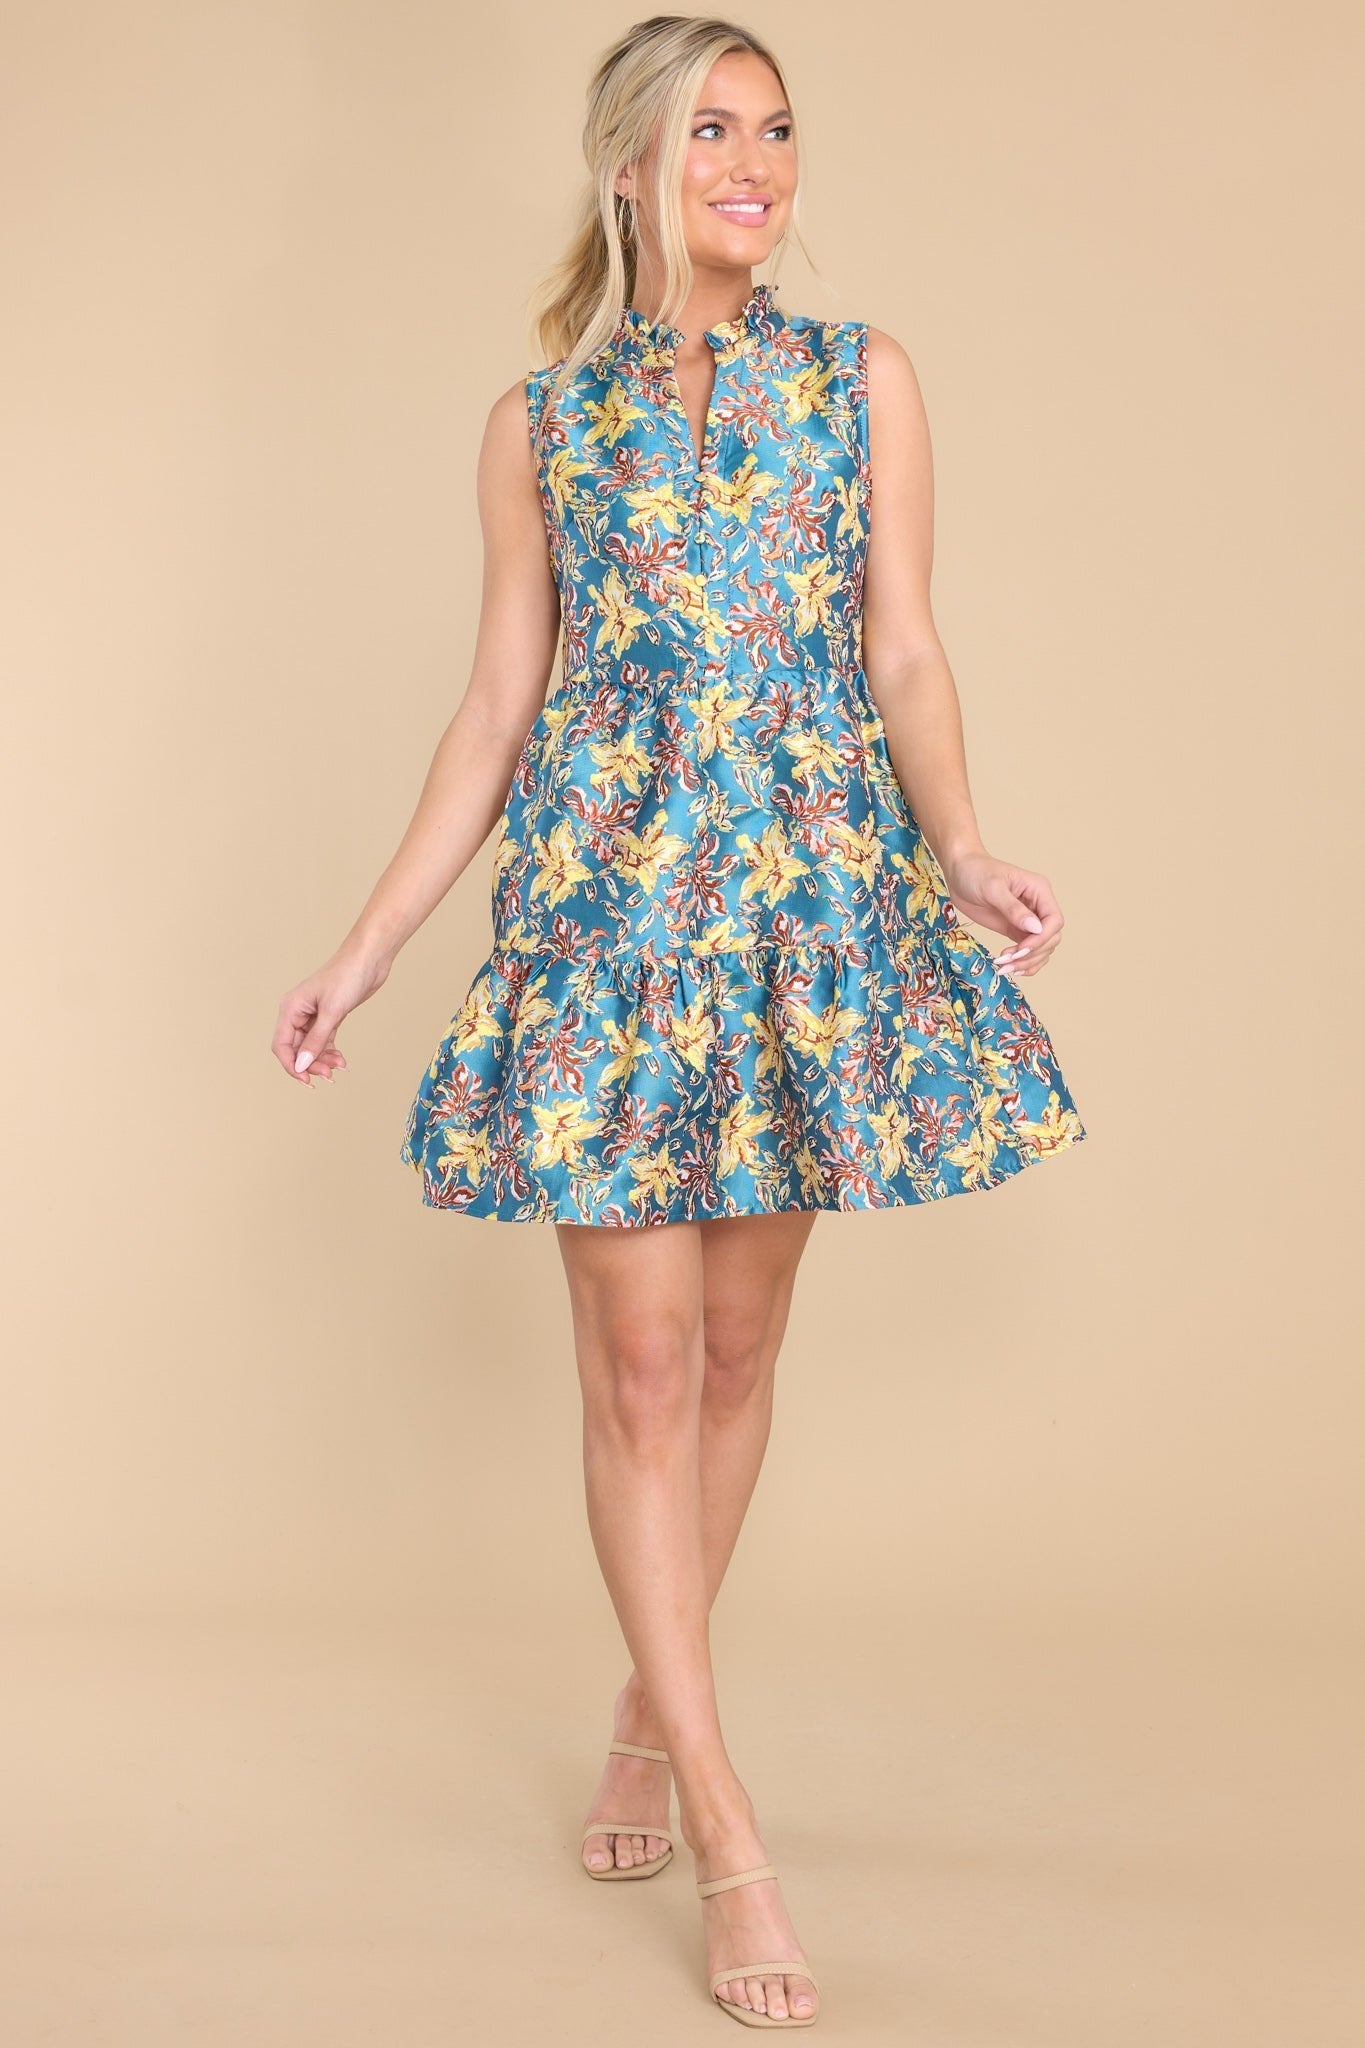 Blooming Pathways Blue Multi Floral Dress - Red Dress